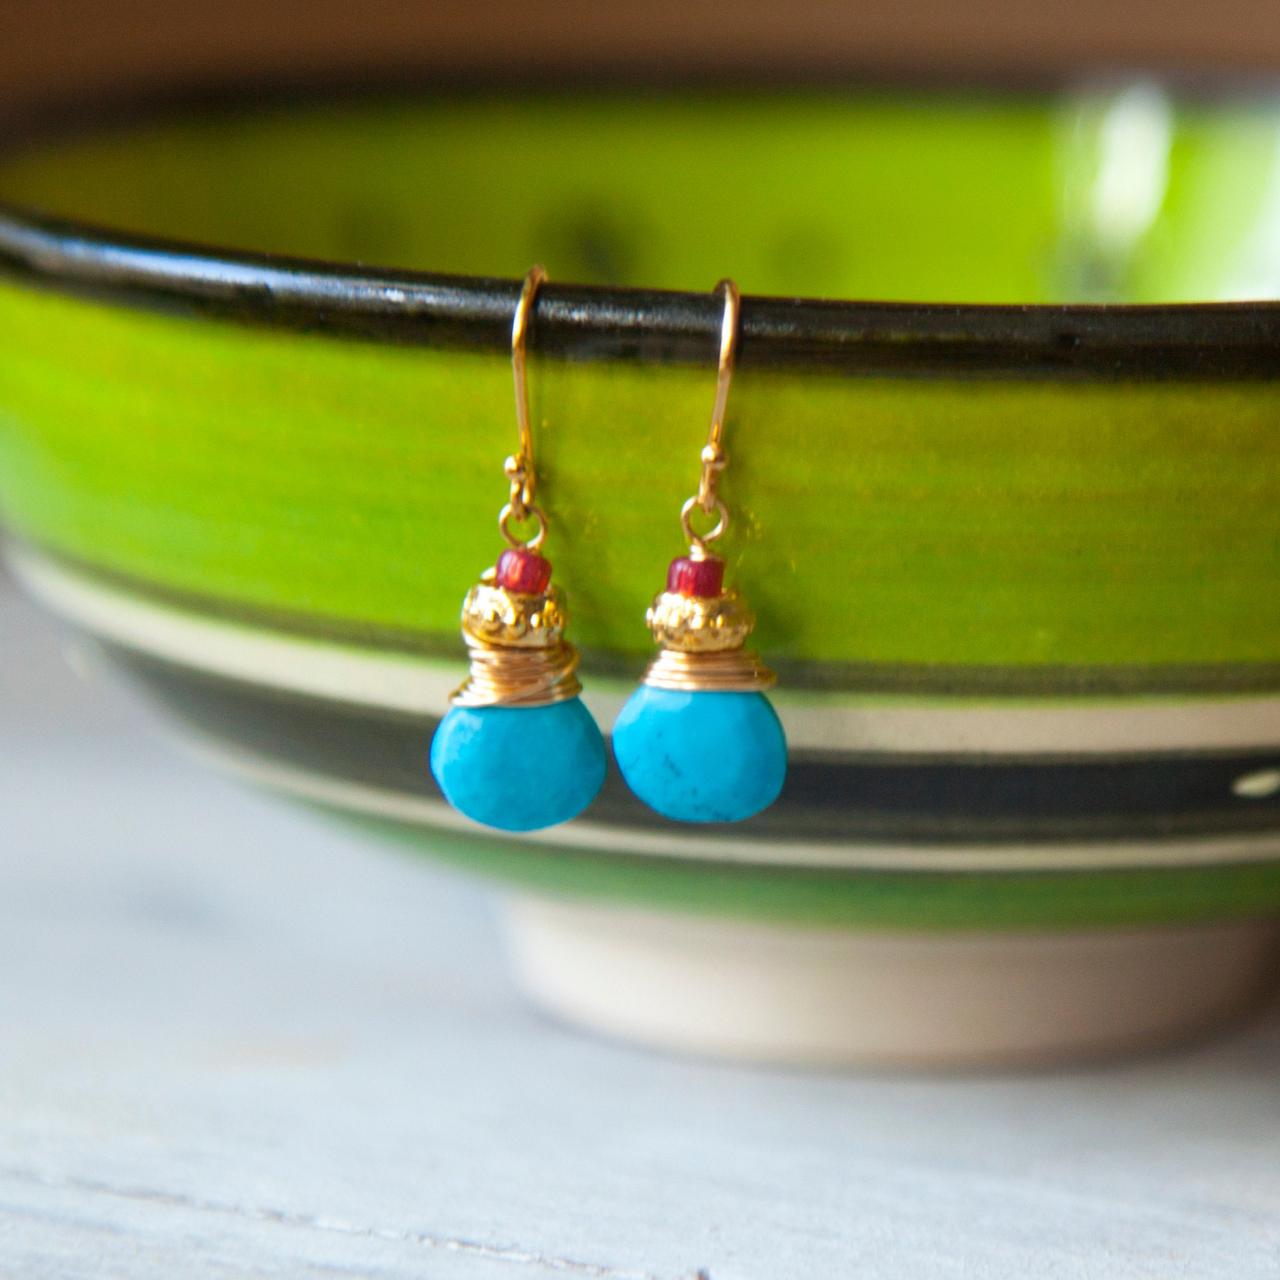 Turquoise Earrings, Tiny Gold Earrings From Real Turquoise And Czech Glass, Boho Earrings Oriental Egyptian Ethnic Gypsy Statement Earrings